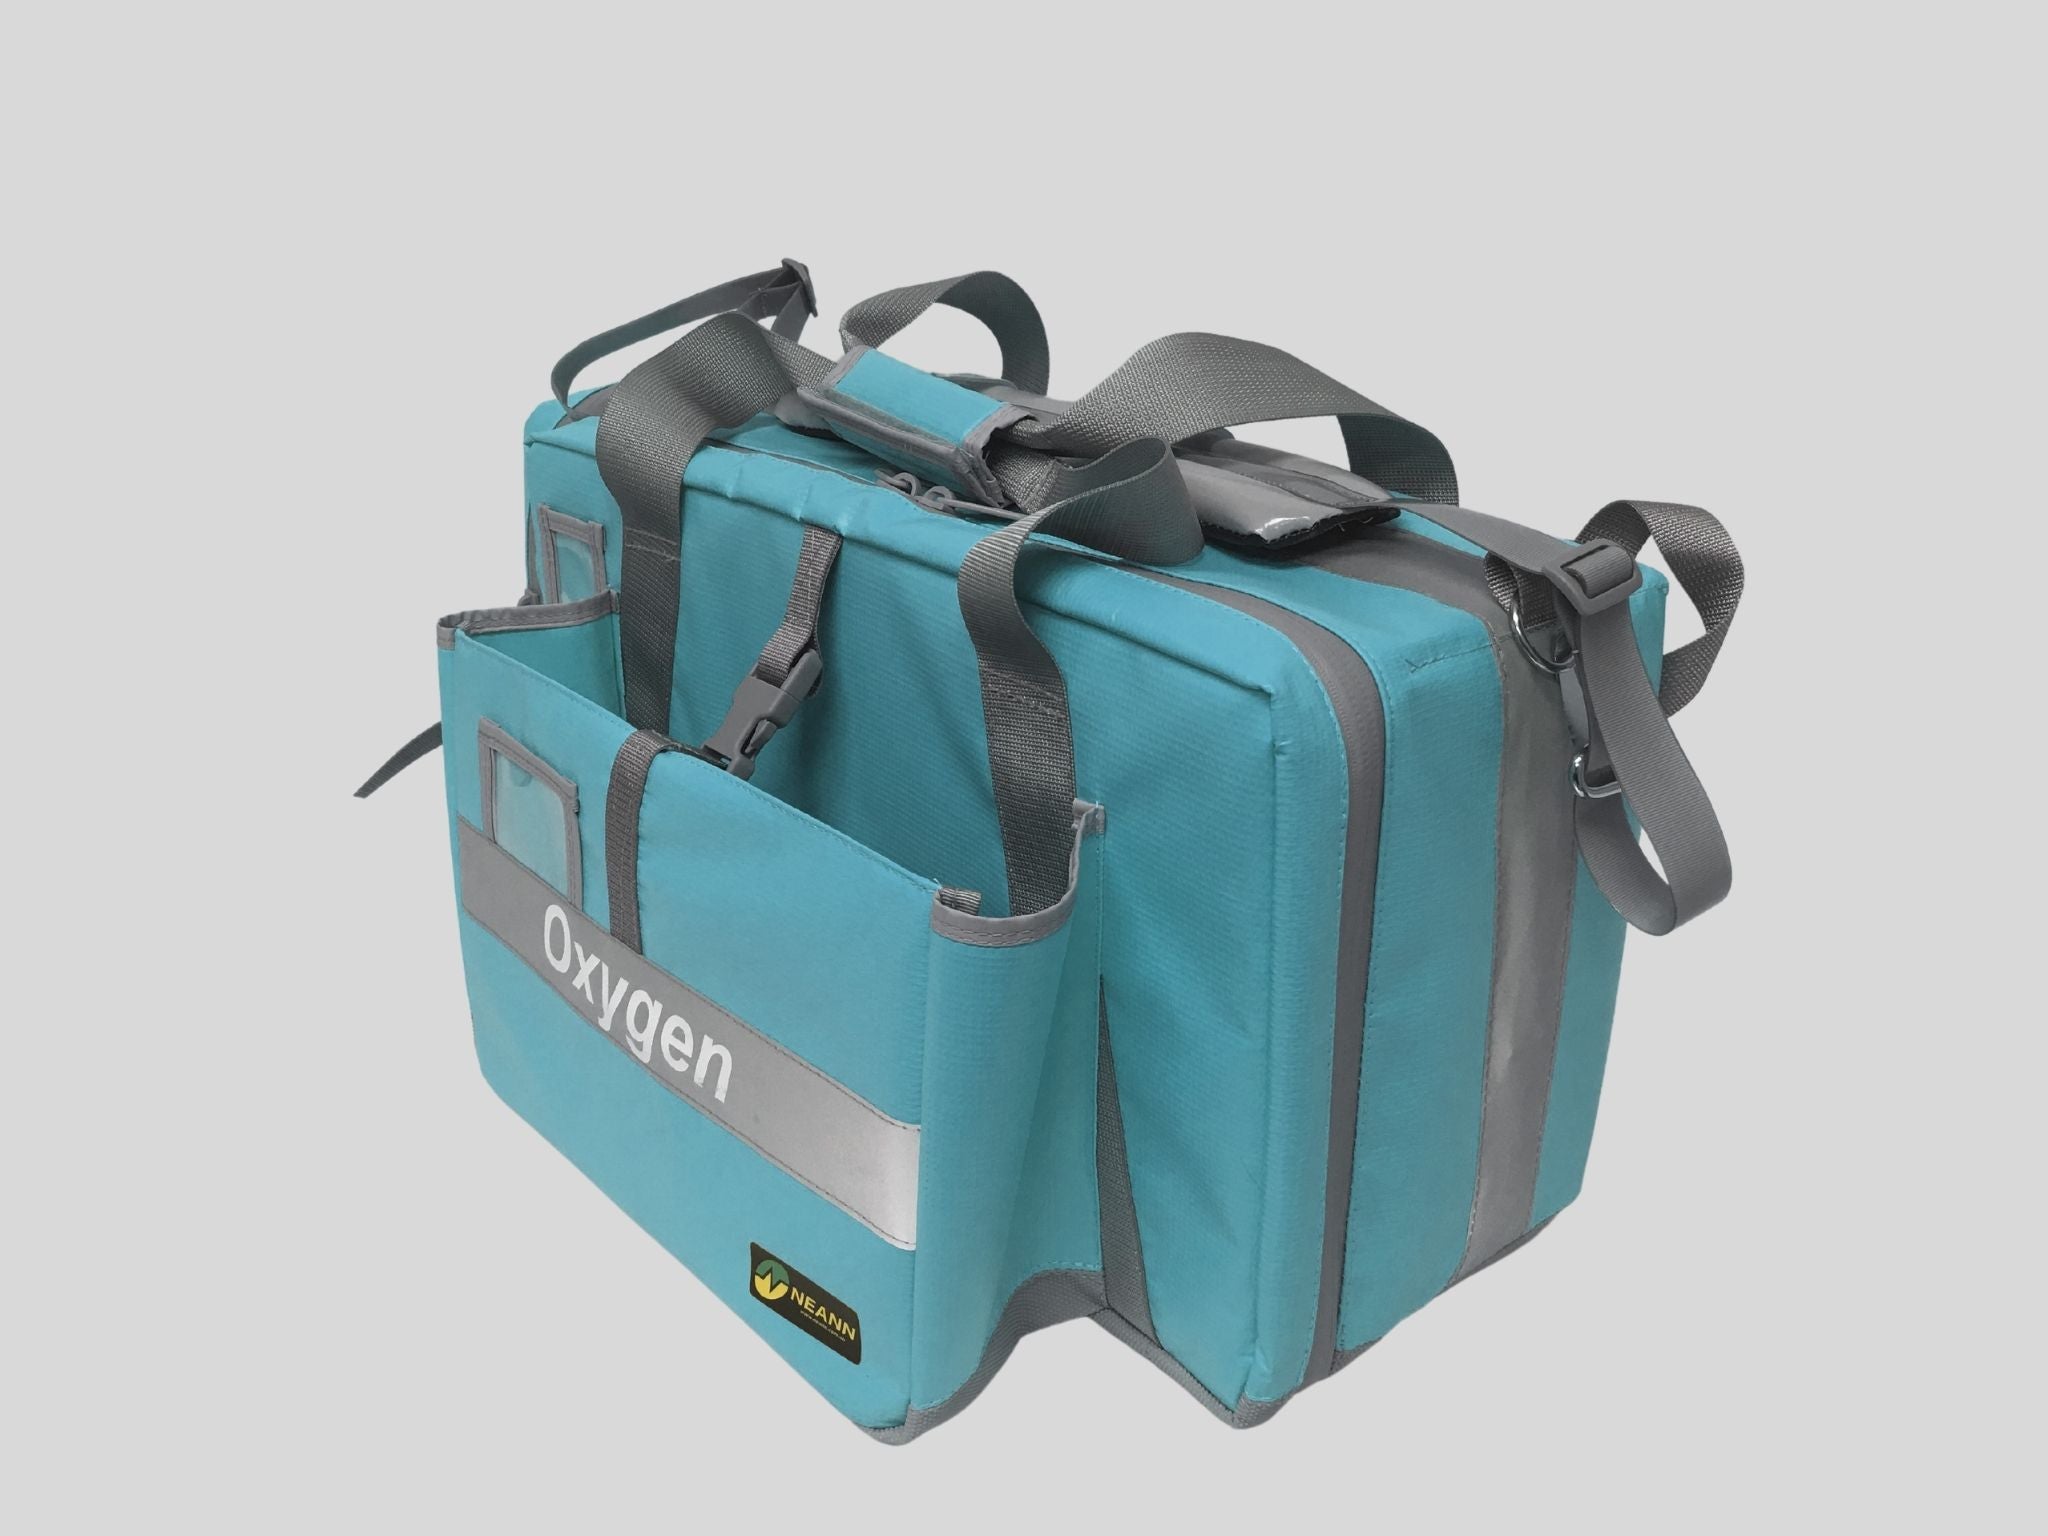 Neann Aquatic OTK Oxygen Therapy Kit Bag Only